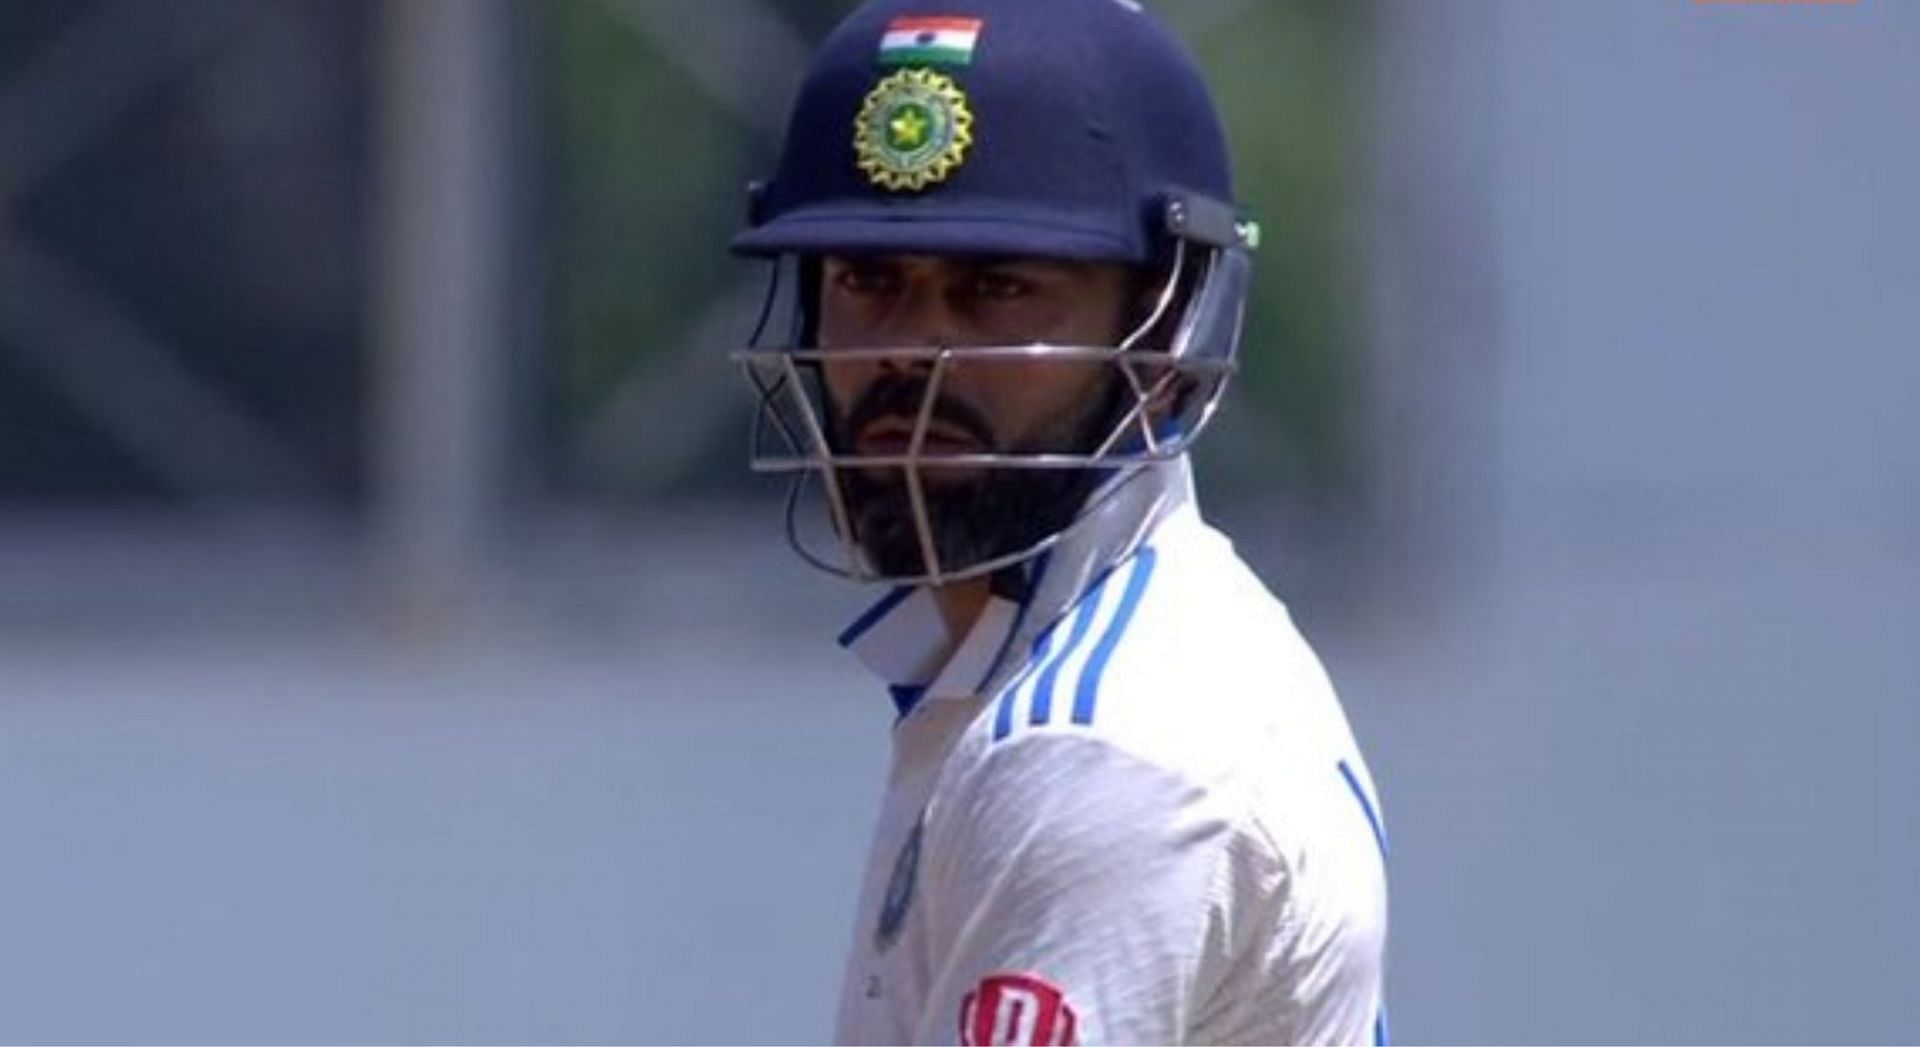 You are currently viewing “Better player is one who can change his game” – Batting coach defends Virat Kohli’s slow innings in 1st IND vs WI Test